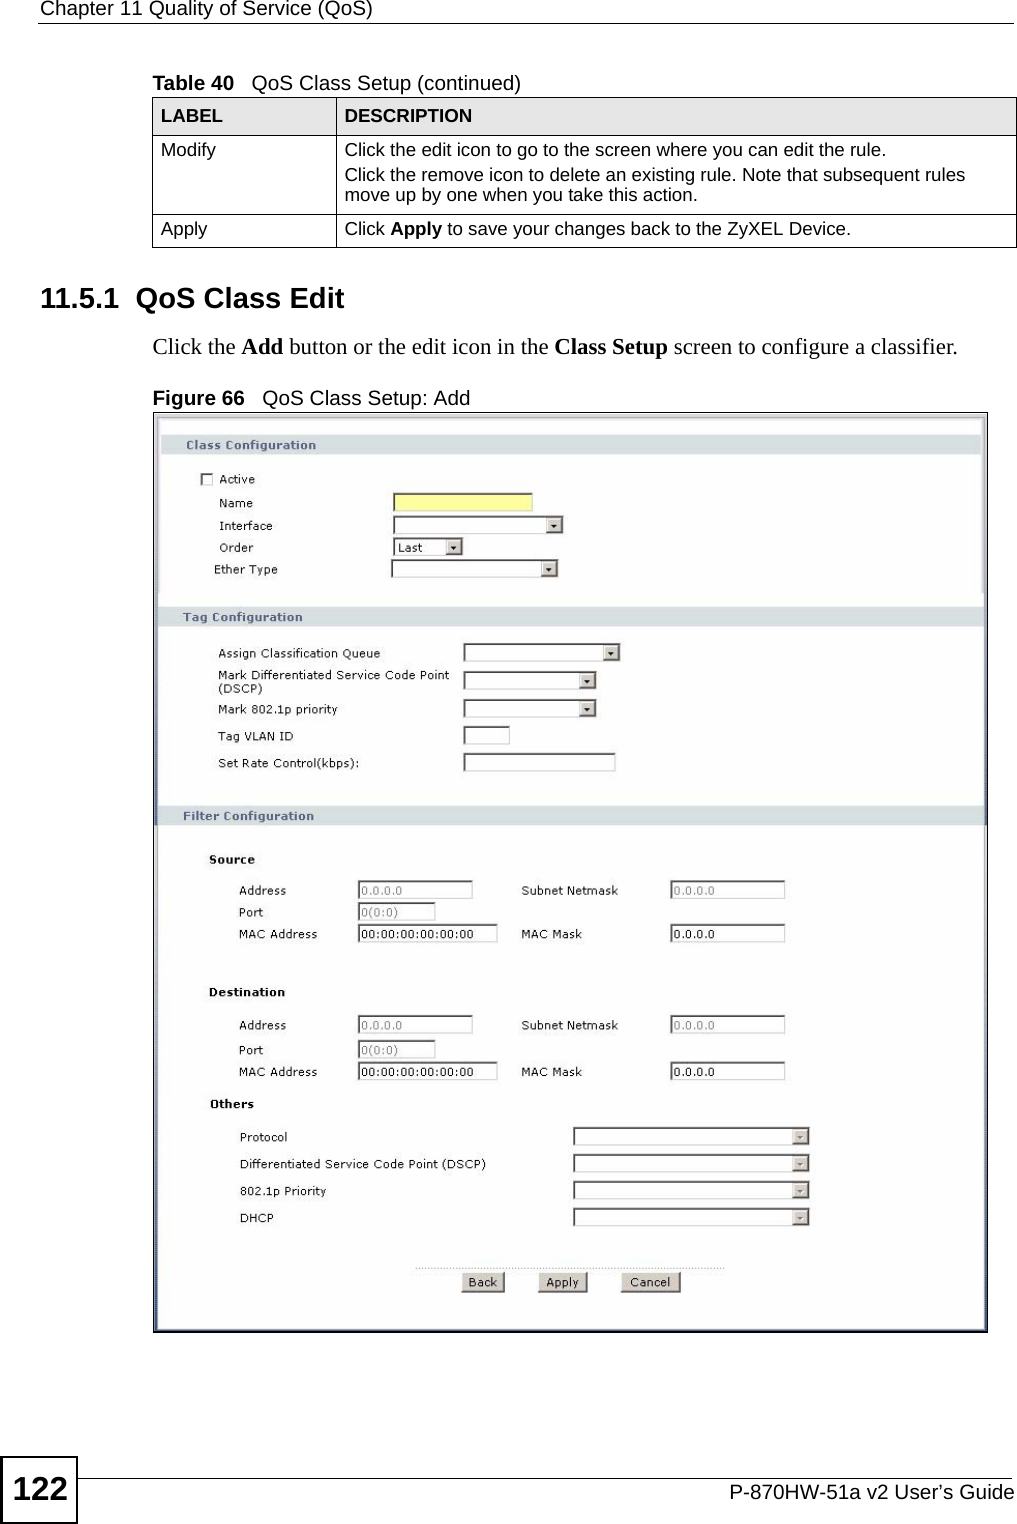 Chapter 11 Quality of Service (QoS)P-870HW-51a v2 User’s Guide12211.5.1  QoS Class Edit Click the Add button or the edit icon in the Class Setup screen to configure a classifier.  Figure 66   QoS Class Setup: AddModify Click the edit icon to go to the screen where you can edit the rule.Click the remove icon to delete an existing rule. Note that subsequent rules move up by one when you take this action.Apply Click Apply to save your changes back to the ZyXEL Device.Table 40   QoS Class Setup (continued)LABEL DESCRIPTION